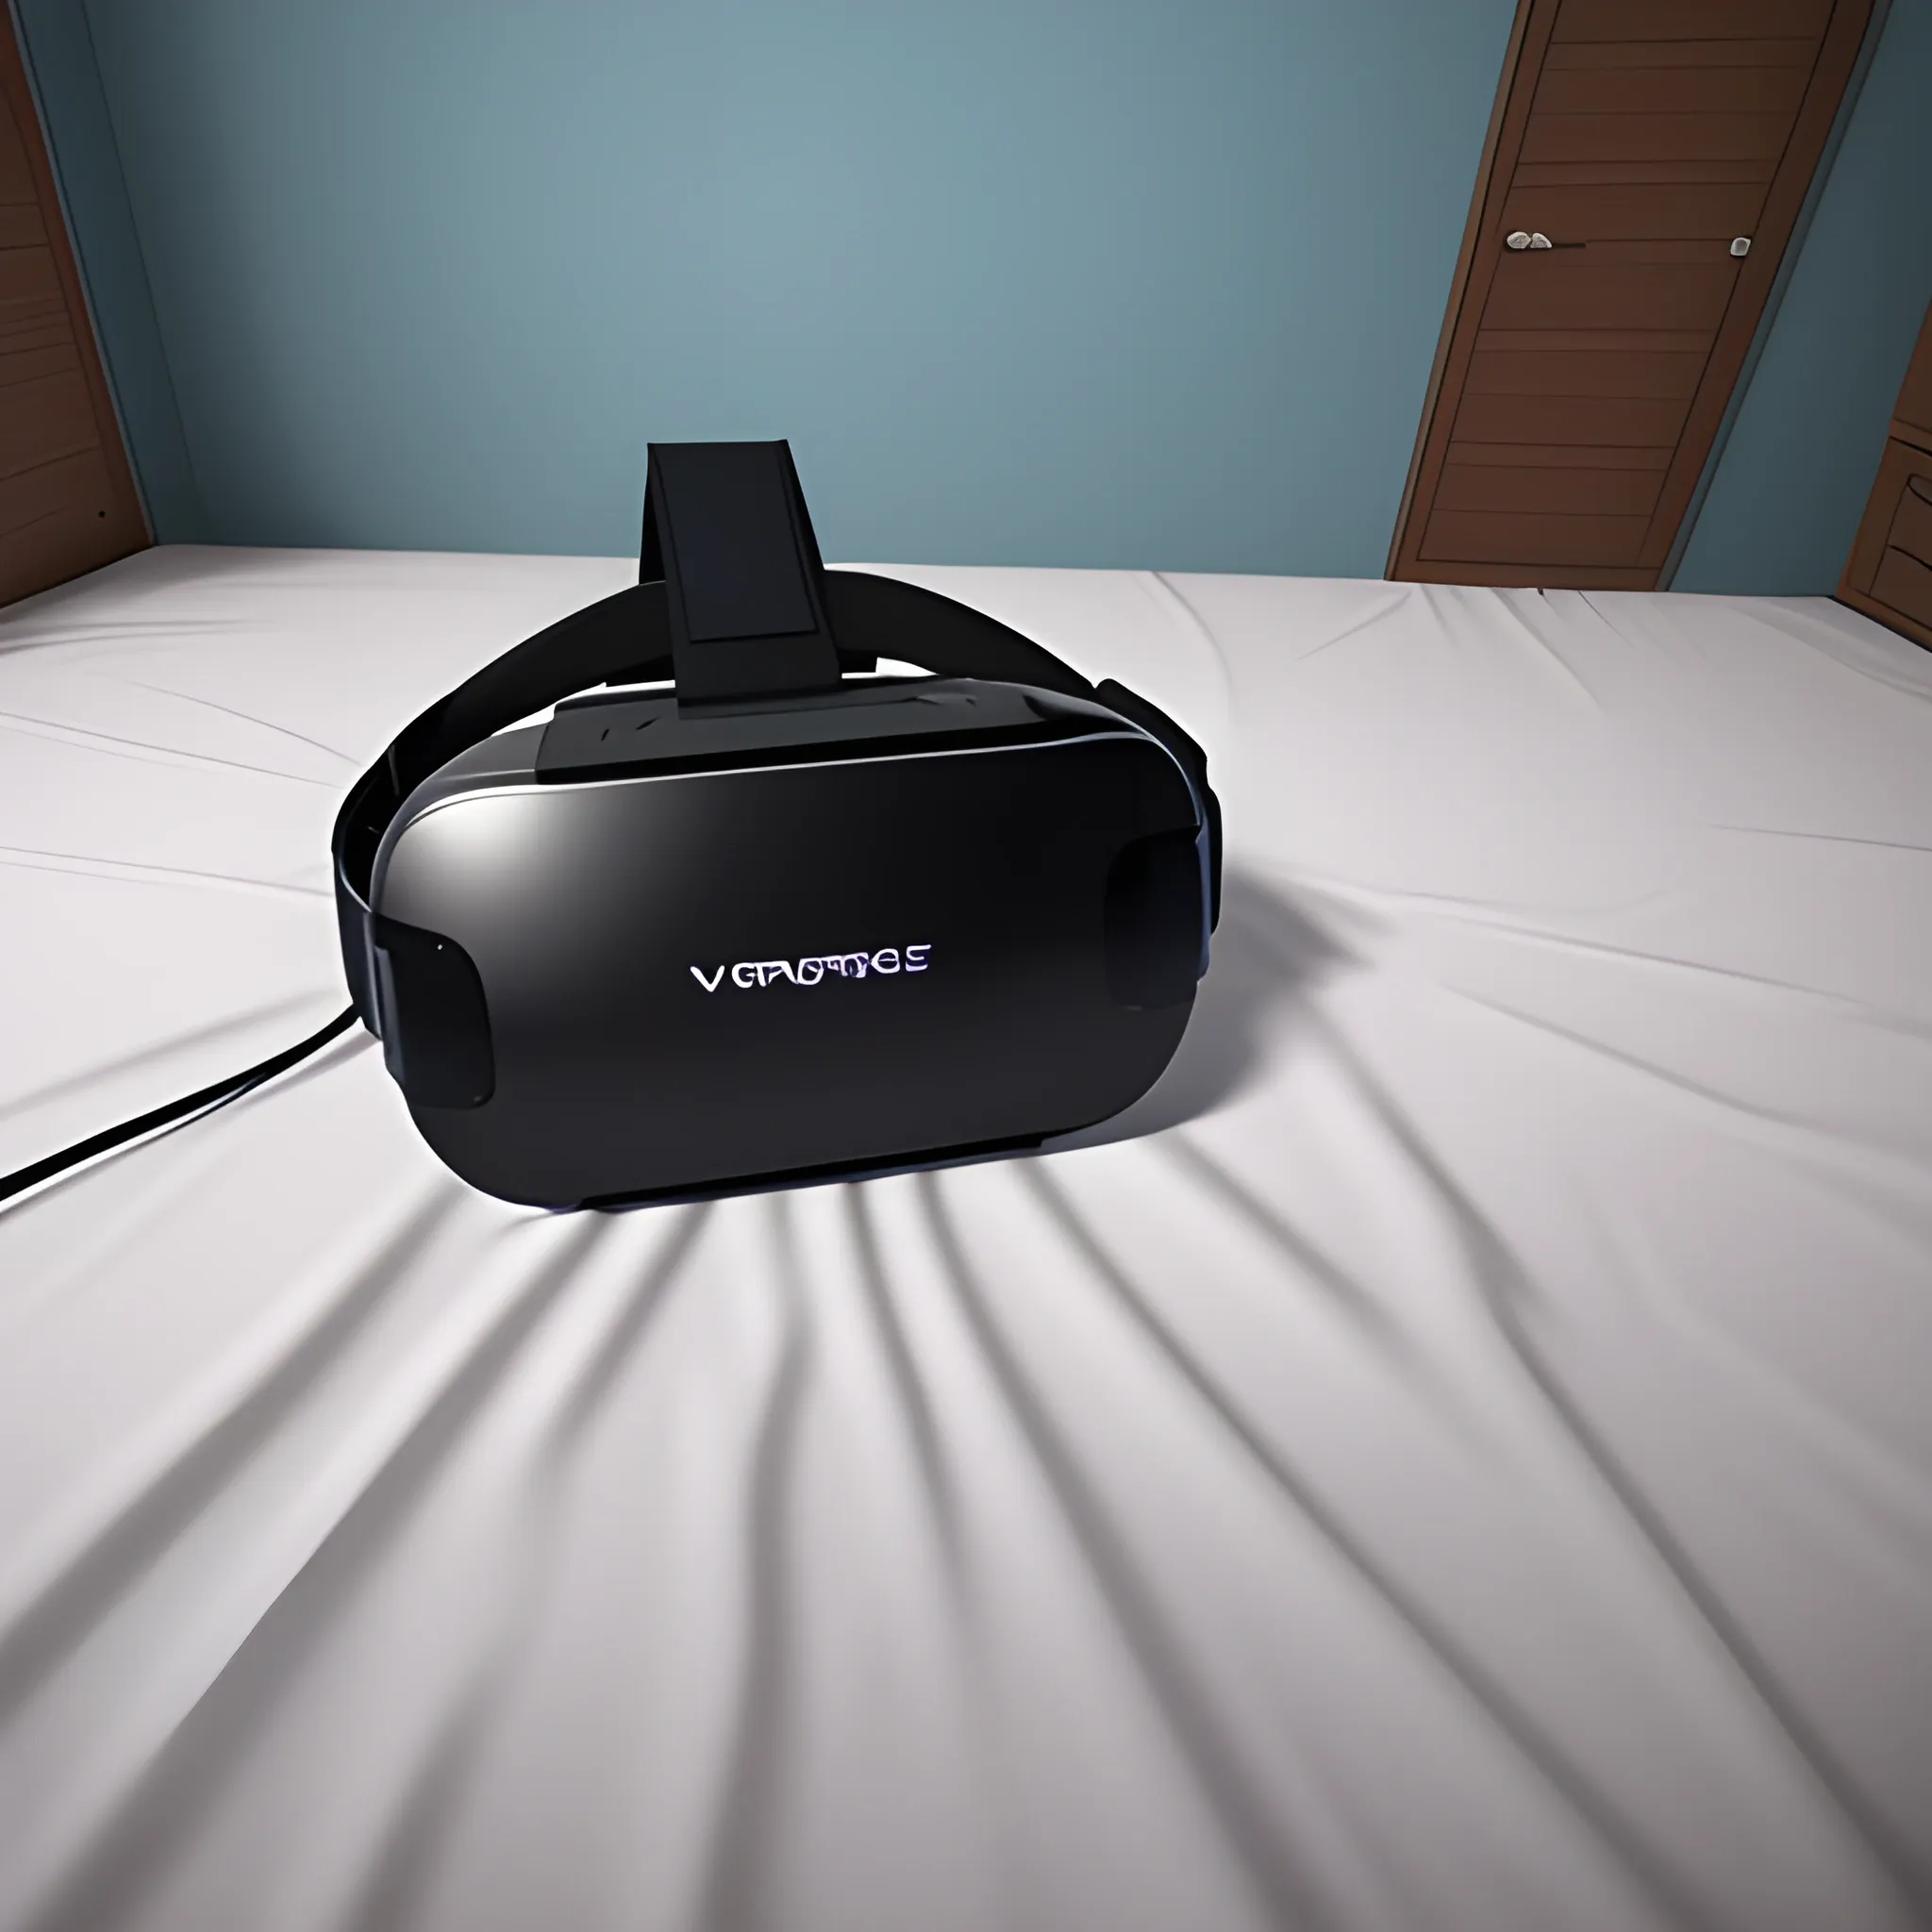 one virtual reality headsets, on top of a bed, make it look like a game